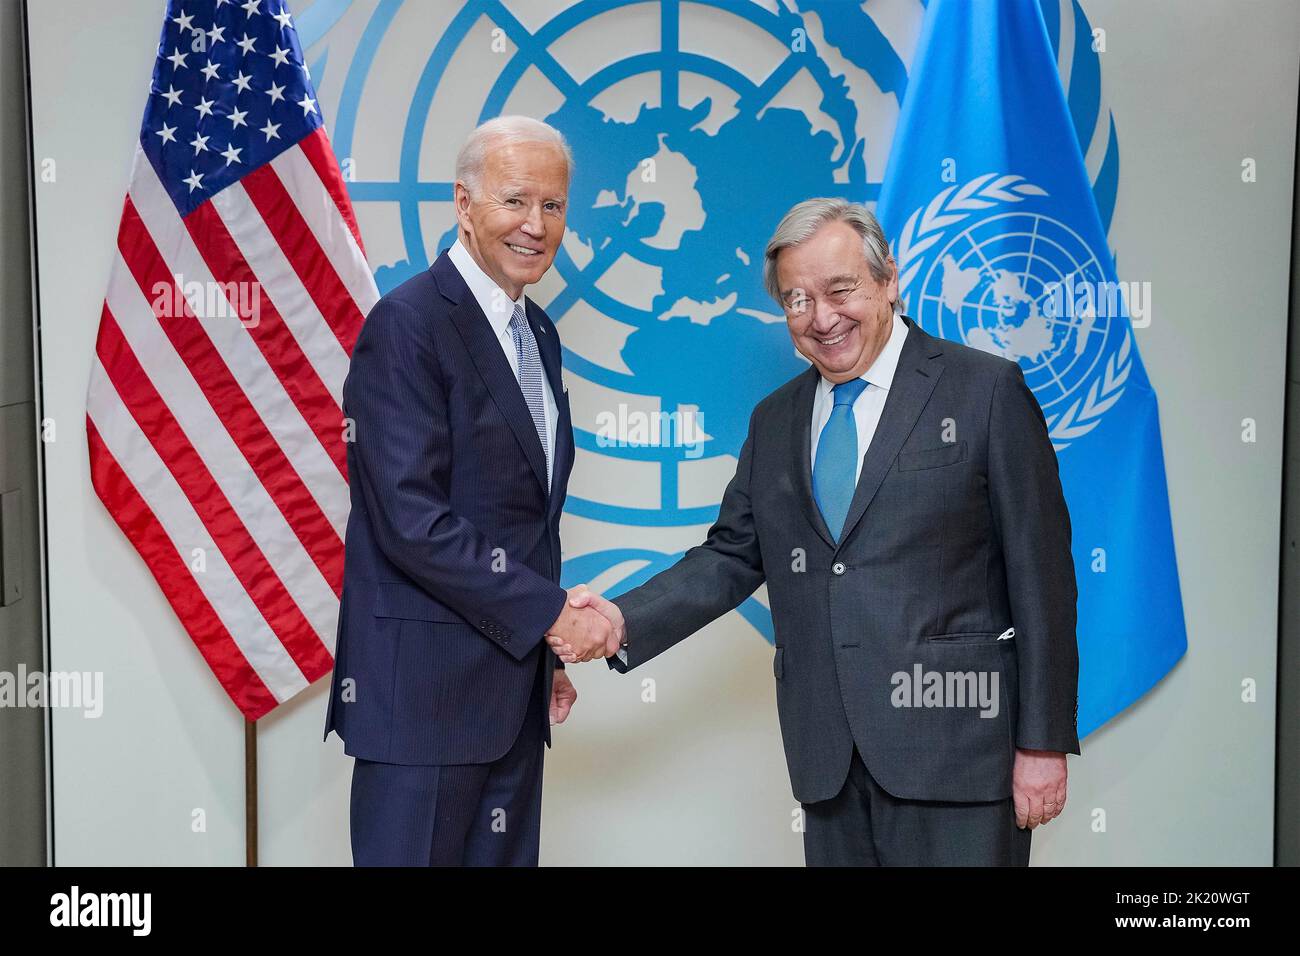 New York City, United States. 21st Sep, 2022. U.S. President Joe Biden shakes hands with United Nations Secretary-General Antonio Guterres prior to their bilateral meeting on the sidelines of the 77th Session of the U.N General Assembly, September 21, 2022, in New York City. Credit: Adam Schultz/White House Photo/Alamy Live News Stock Photo